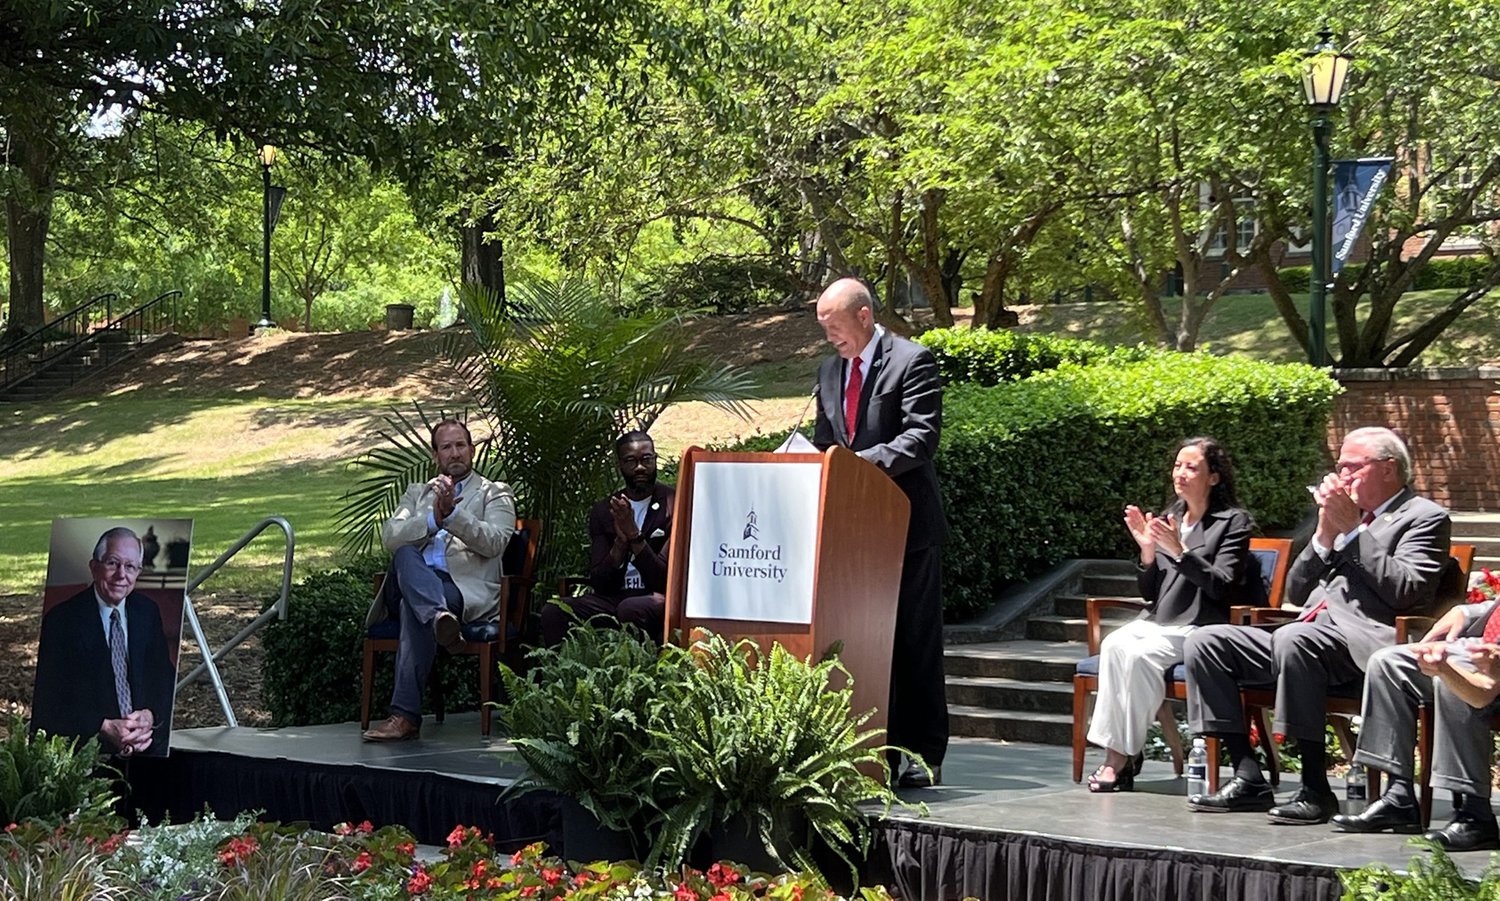 Samford University President Beck Taylor announces the historic $100 million gift from the estate of Marvin Mann during a May 12 press conference.